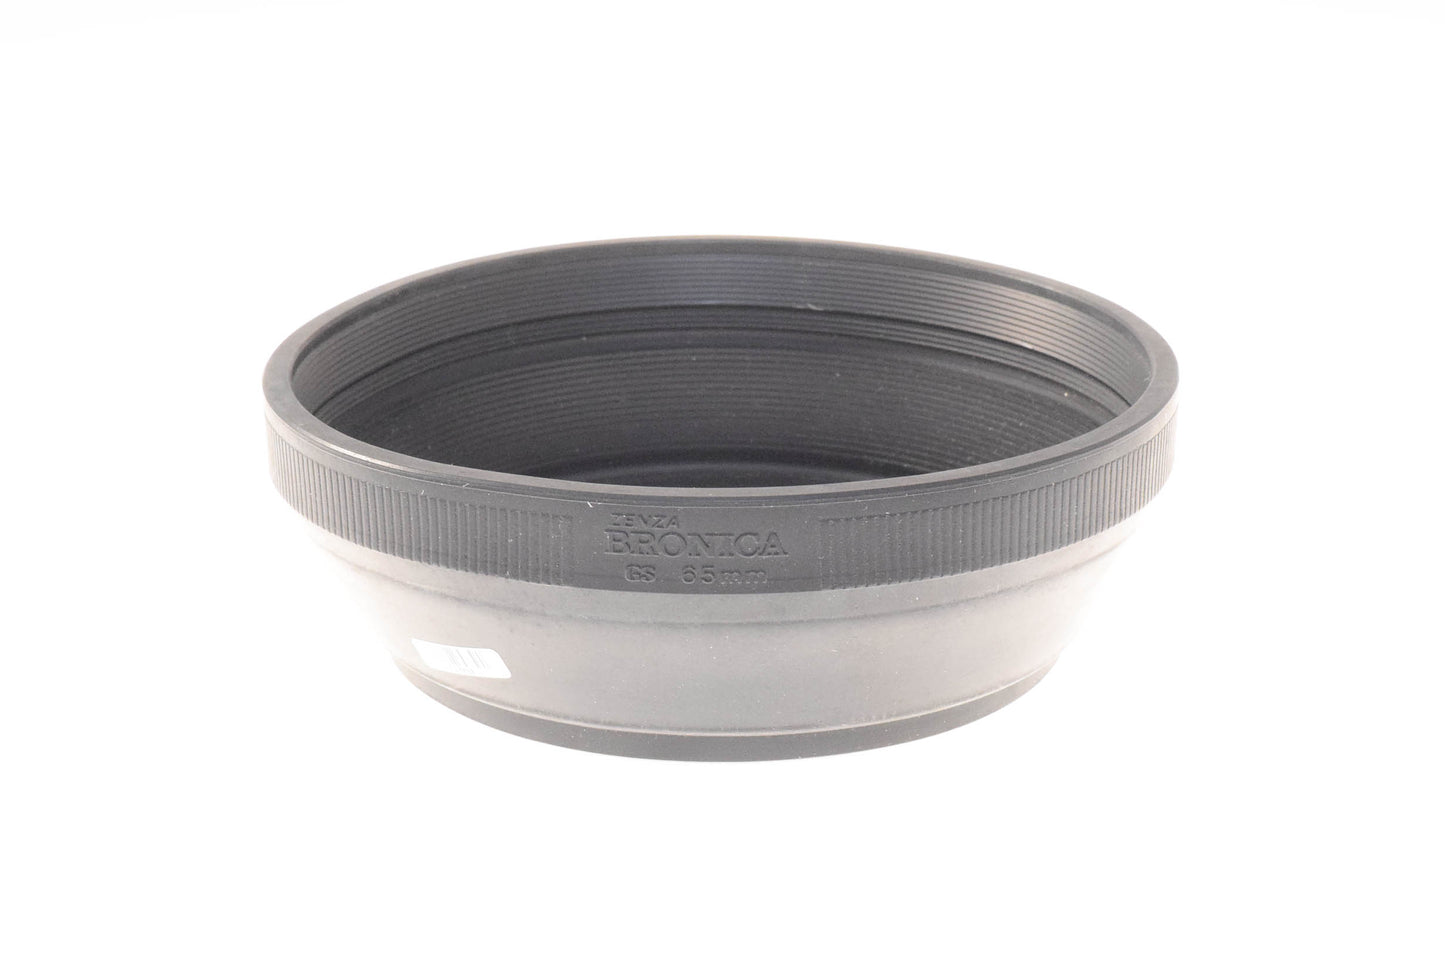 Zenza Bronica Lens Hood for 65mm - Accessory